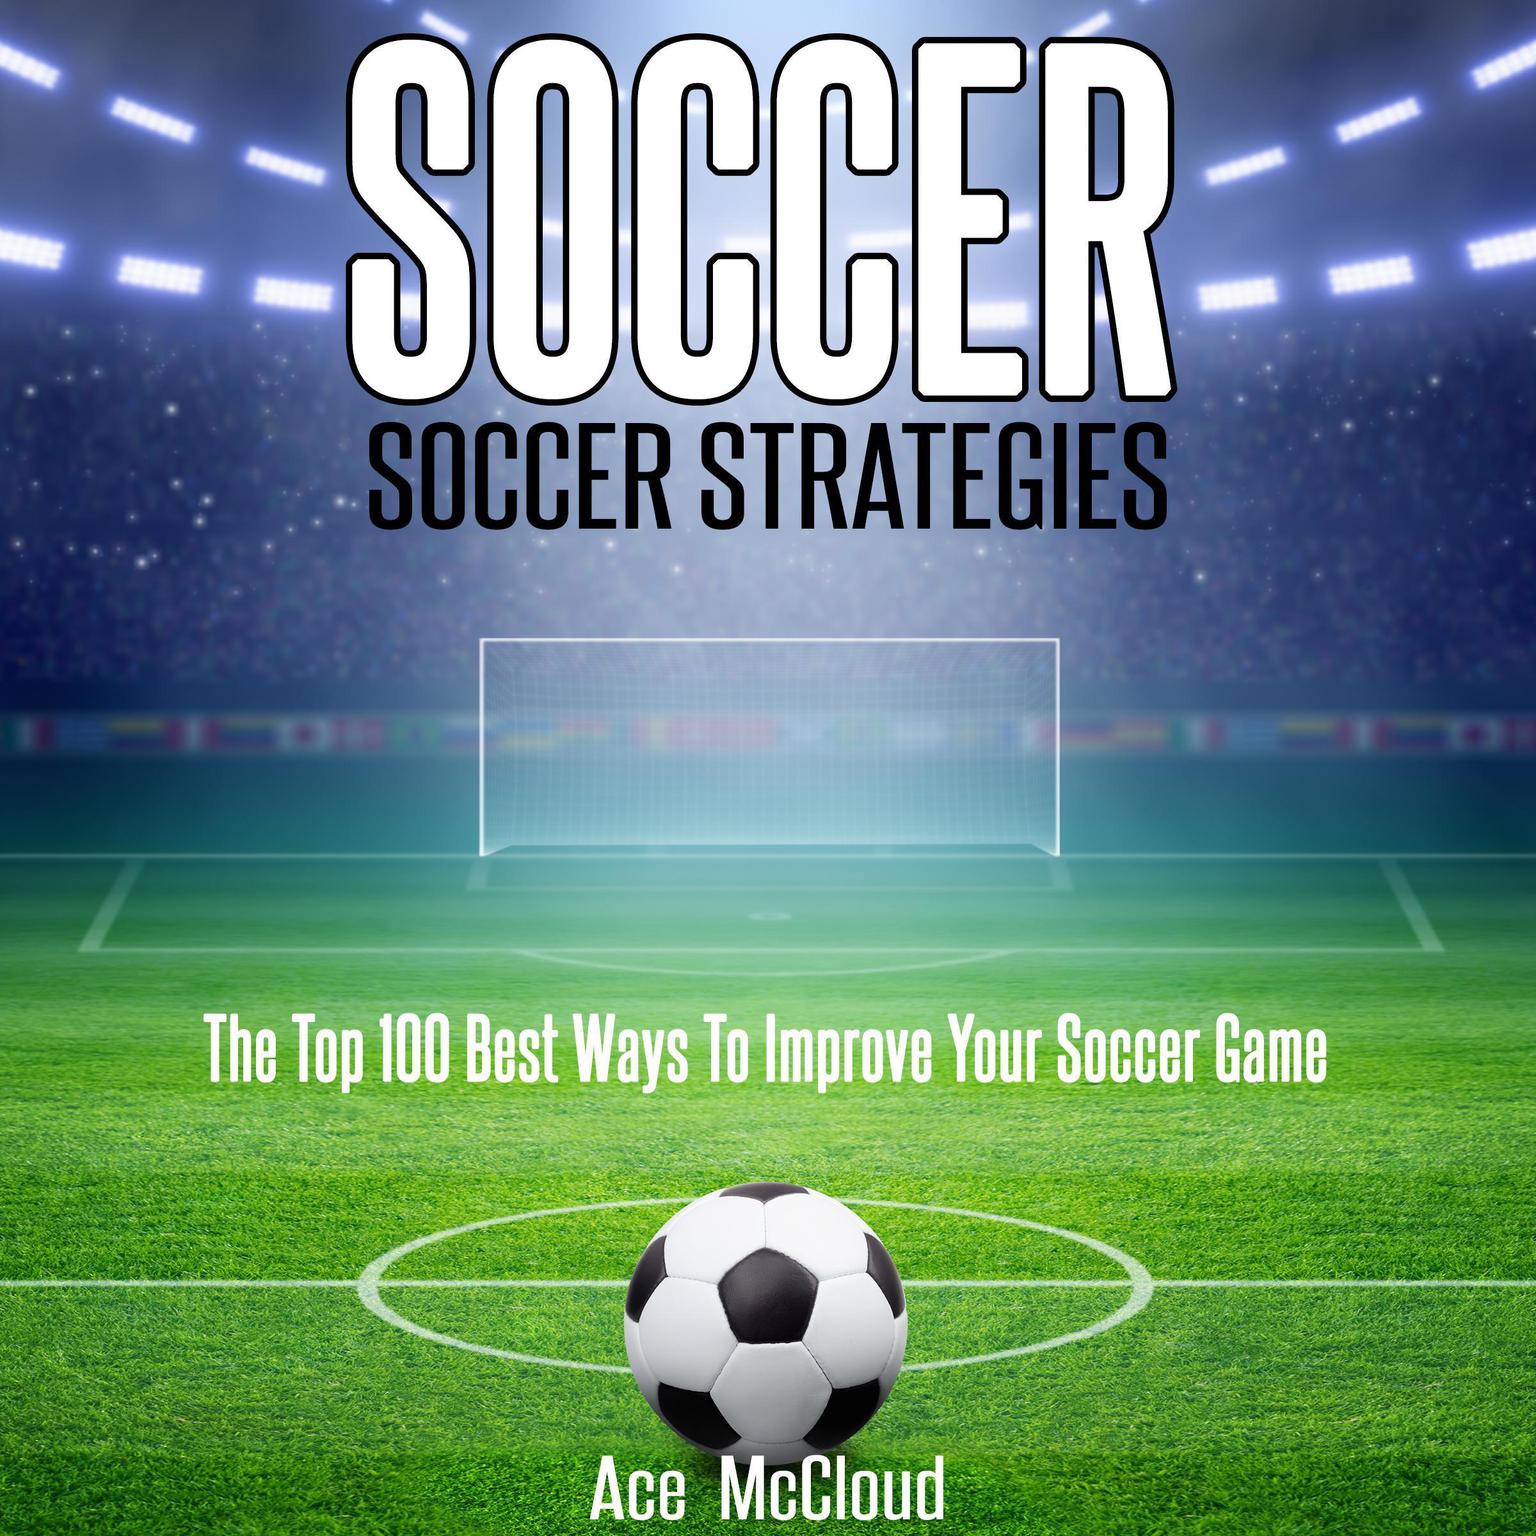 Soccer: Soccer Strategies: The Top 100 Best Ways To Improve Your Soccer Game Audiobook, by Ace McCloud